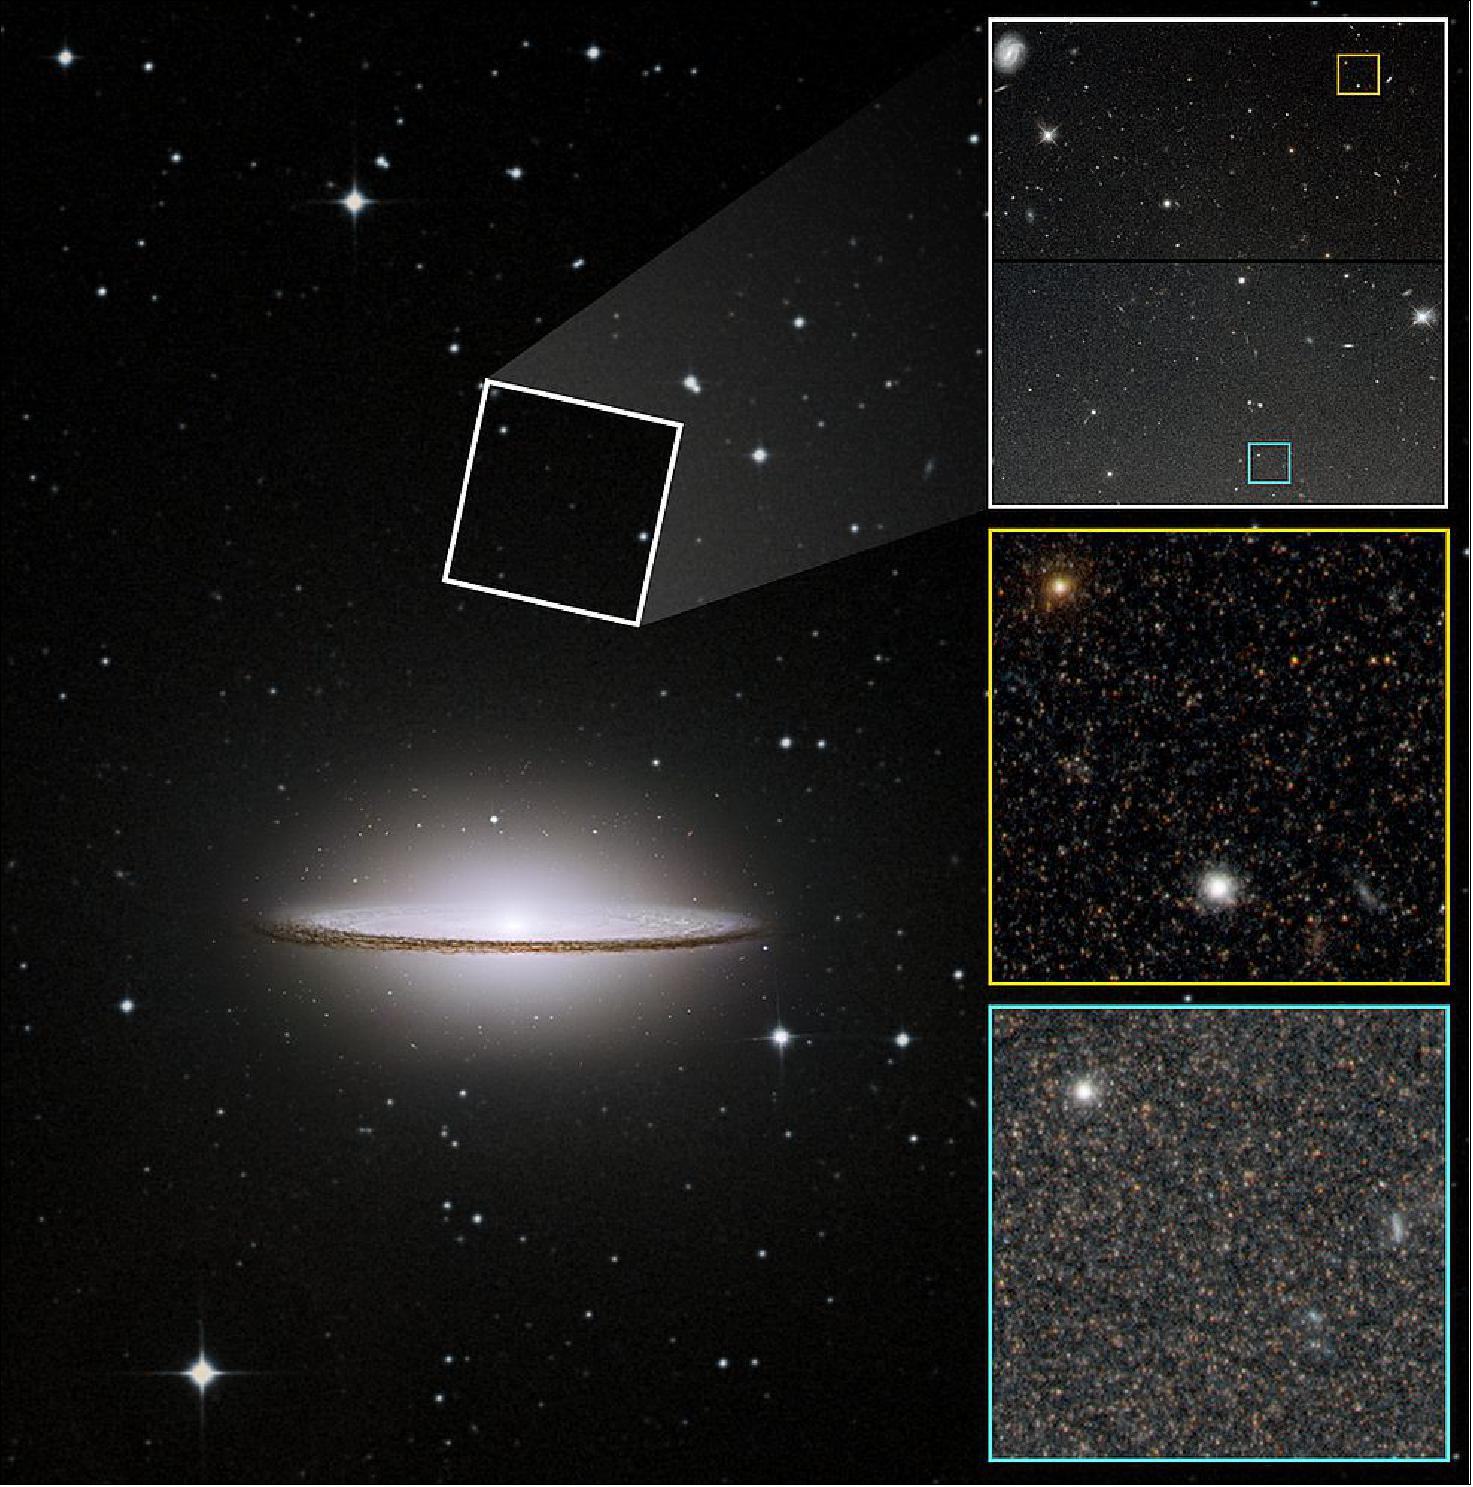 Figure 88: On the left is an image of the Sombrero galaxy (M104) that includes a portion of the much fainter halo far outside its bright disk and bulge. Hubble photographed two regions in the halo (one of which is shown by the white box). The images on the right zoom in to show the level of detail Hubble captured. The orange box, a small subset of Hubble's view, contains myriad halo stars. The stellar population increases in density closer to the galaxy's disk (bottom blue box). Each frame contains a bright globular cluster of stars, of which there are many in the galaxy's halo. The Sombrero's halo contained more metal-rich stars than expected, but even stranger was the near-absence of old, metal-poor stars typically found in the halos of massive galaxies. Many of the globular clusters, however, contain metal-poor stars. A possible explanation for the Sombrero's perplexing features is that it is the product of the merger of massive galaxies billions of years ago, even though the smooth appearance of the galaxy's disk and halo show no signs of such a huge disruption [image credits: NASA/Digitized Sky Survey/P. Goudfrooij (STScI)/The Hubble Heritage Team (STScI/AURA)]